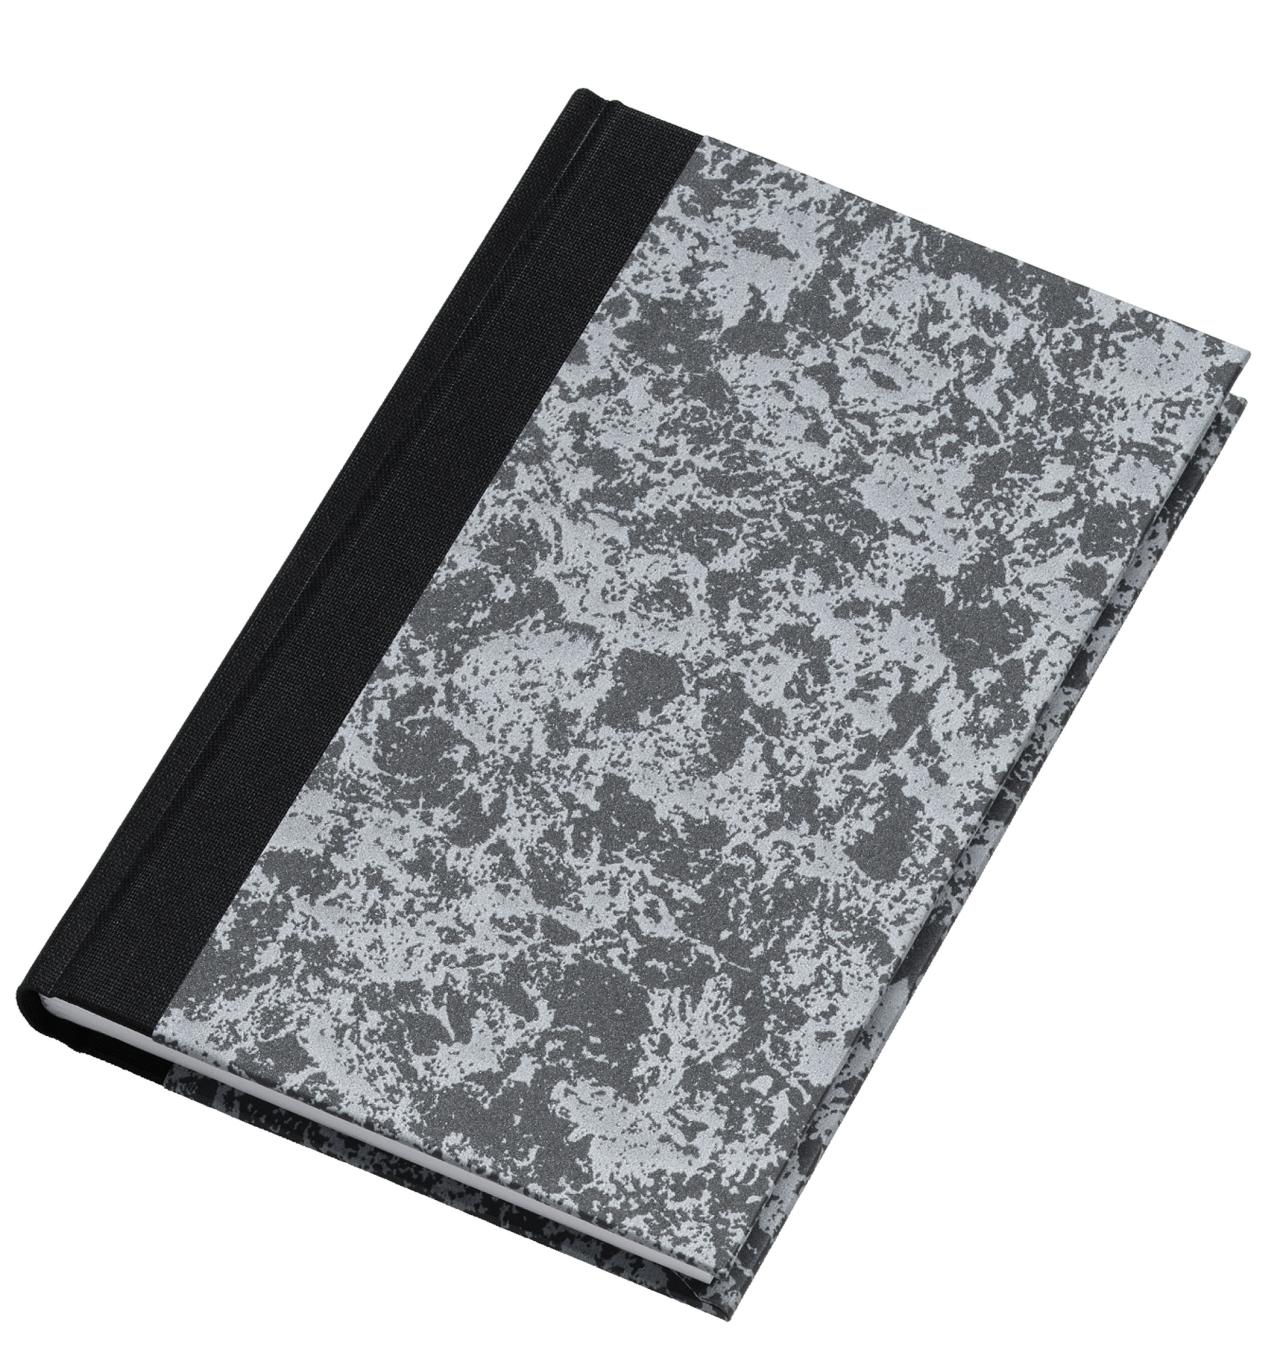 Atlanta Excellent Notebook, sewn, 330 x 205 mm, 144 pages